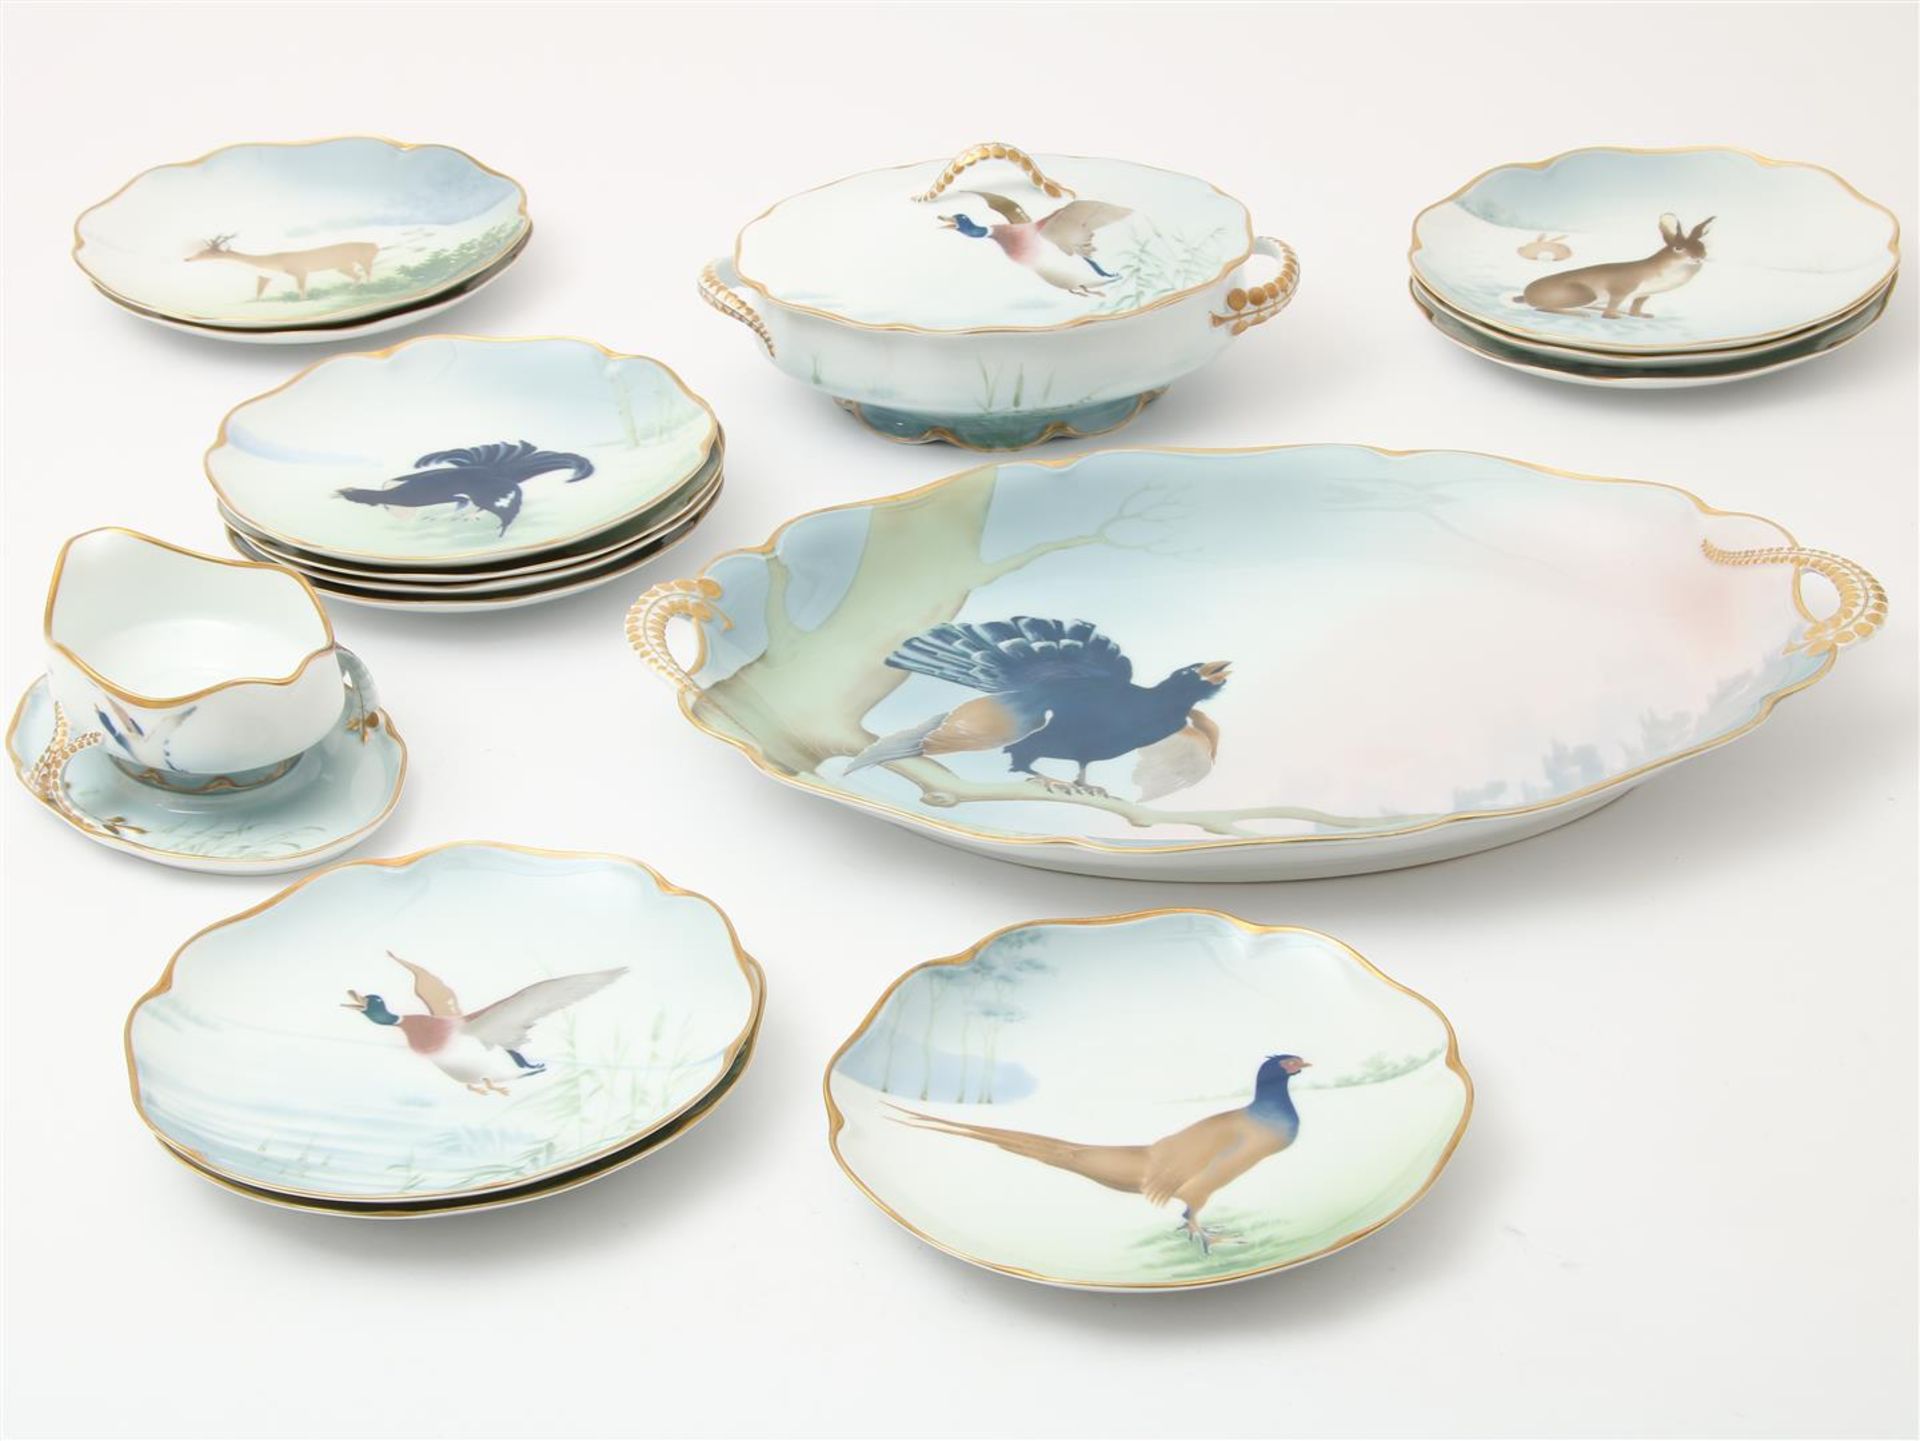 Porcelain hunting service, consisting of 12 plates, tureen, sauce boat and serving bowl with decor